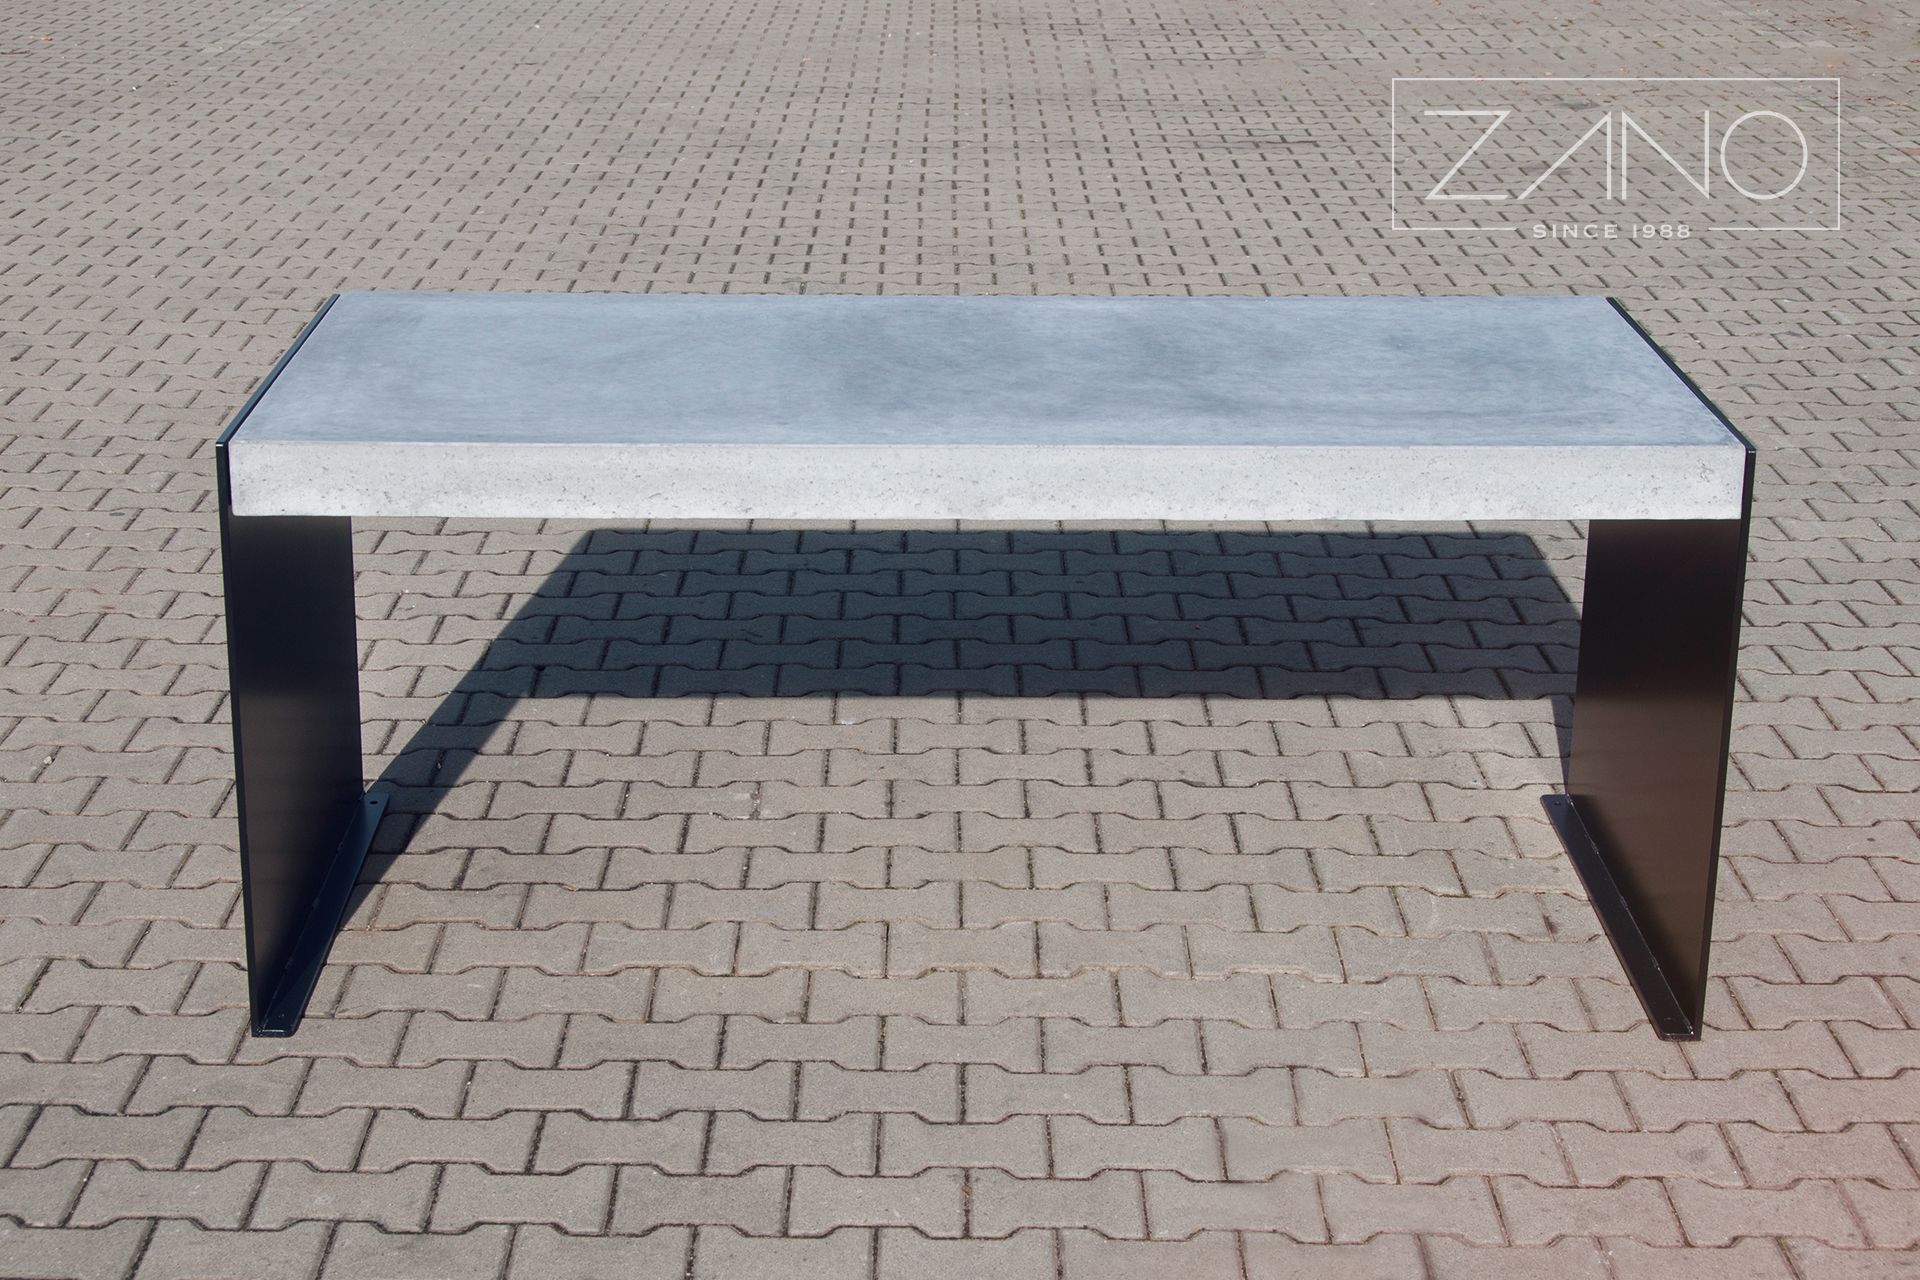 https://www.zano-streetfurniture.com/images/8750/table-with-concrete-top.jpg